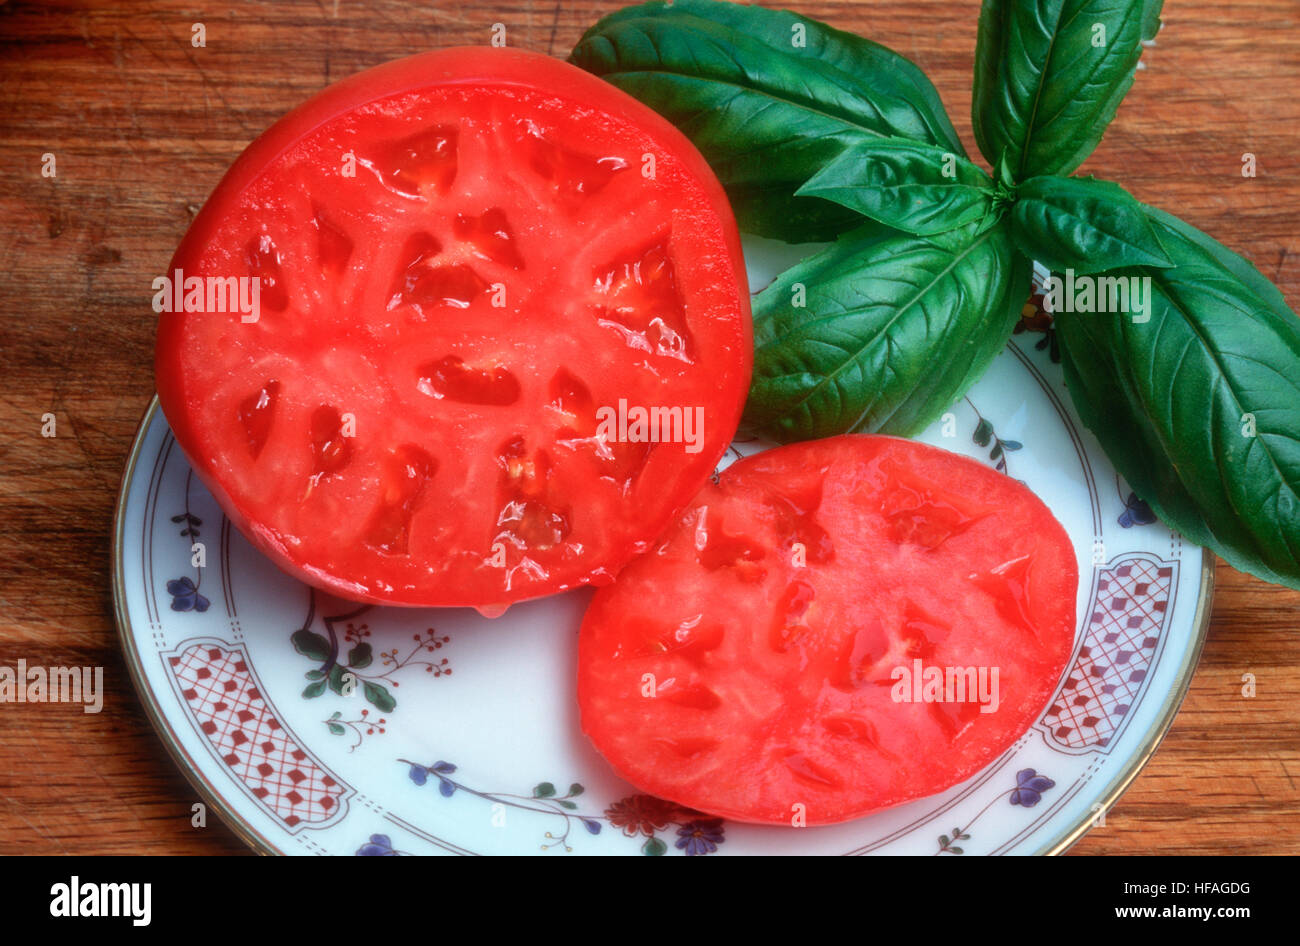 Tomato sliced open on plate with basil herb, seedless beefsteak vegetable freshly cut ripe red just picked ready to eat healthy Stock Photo